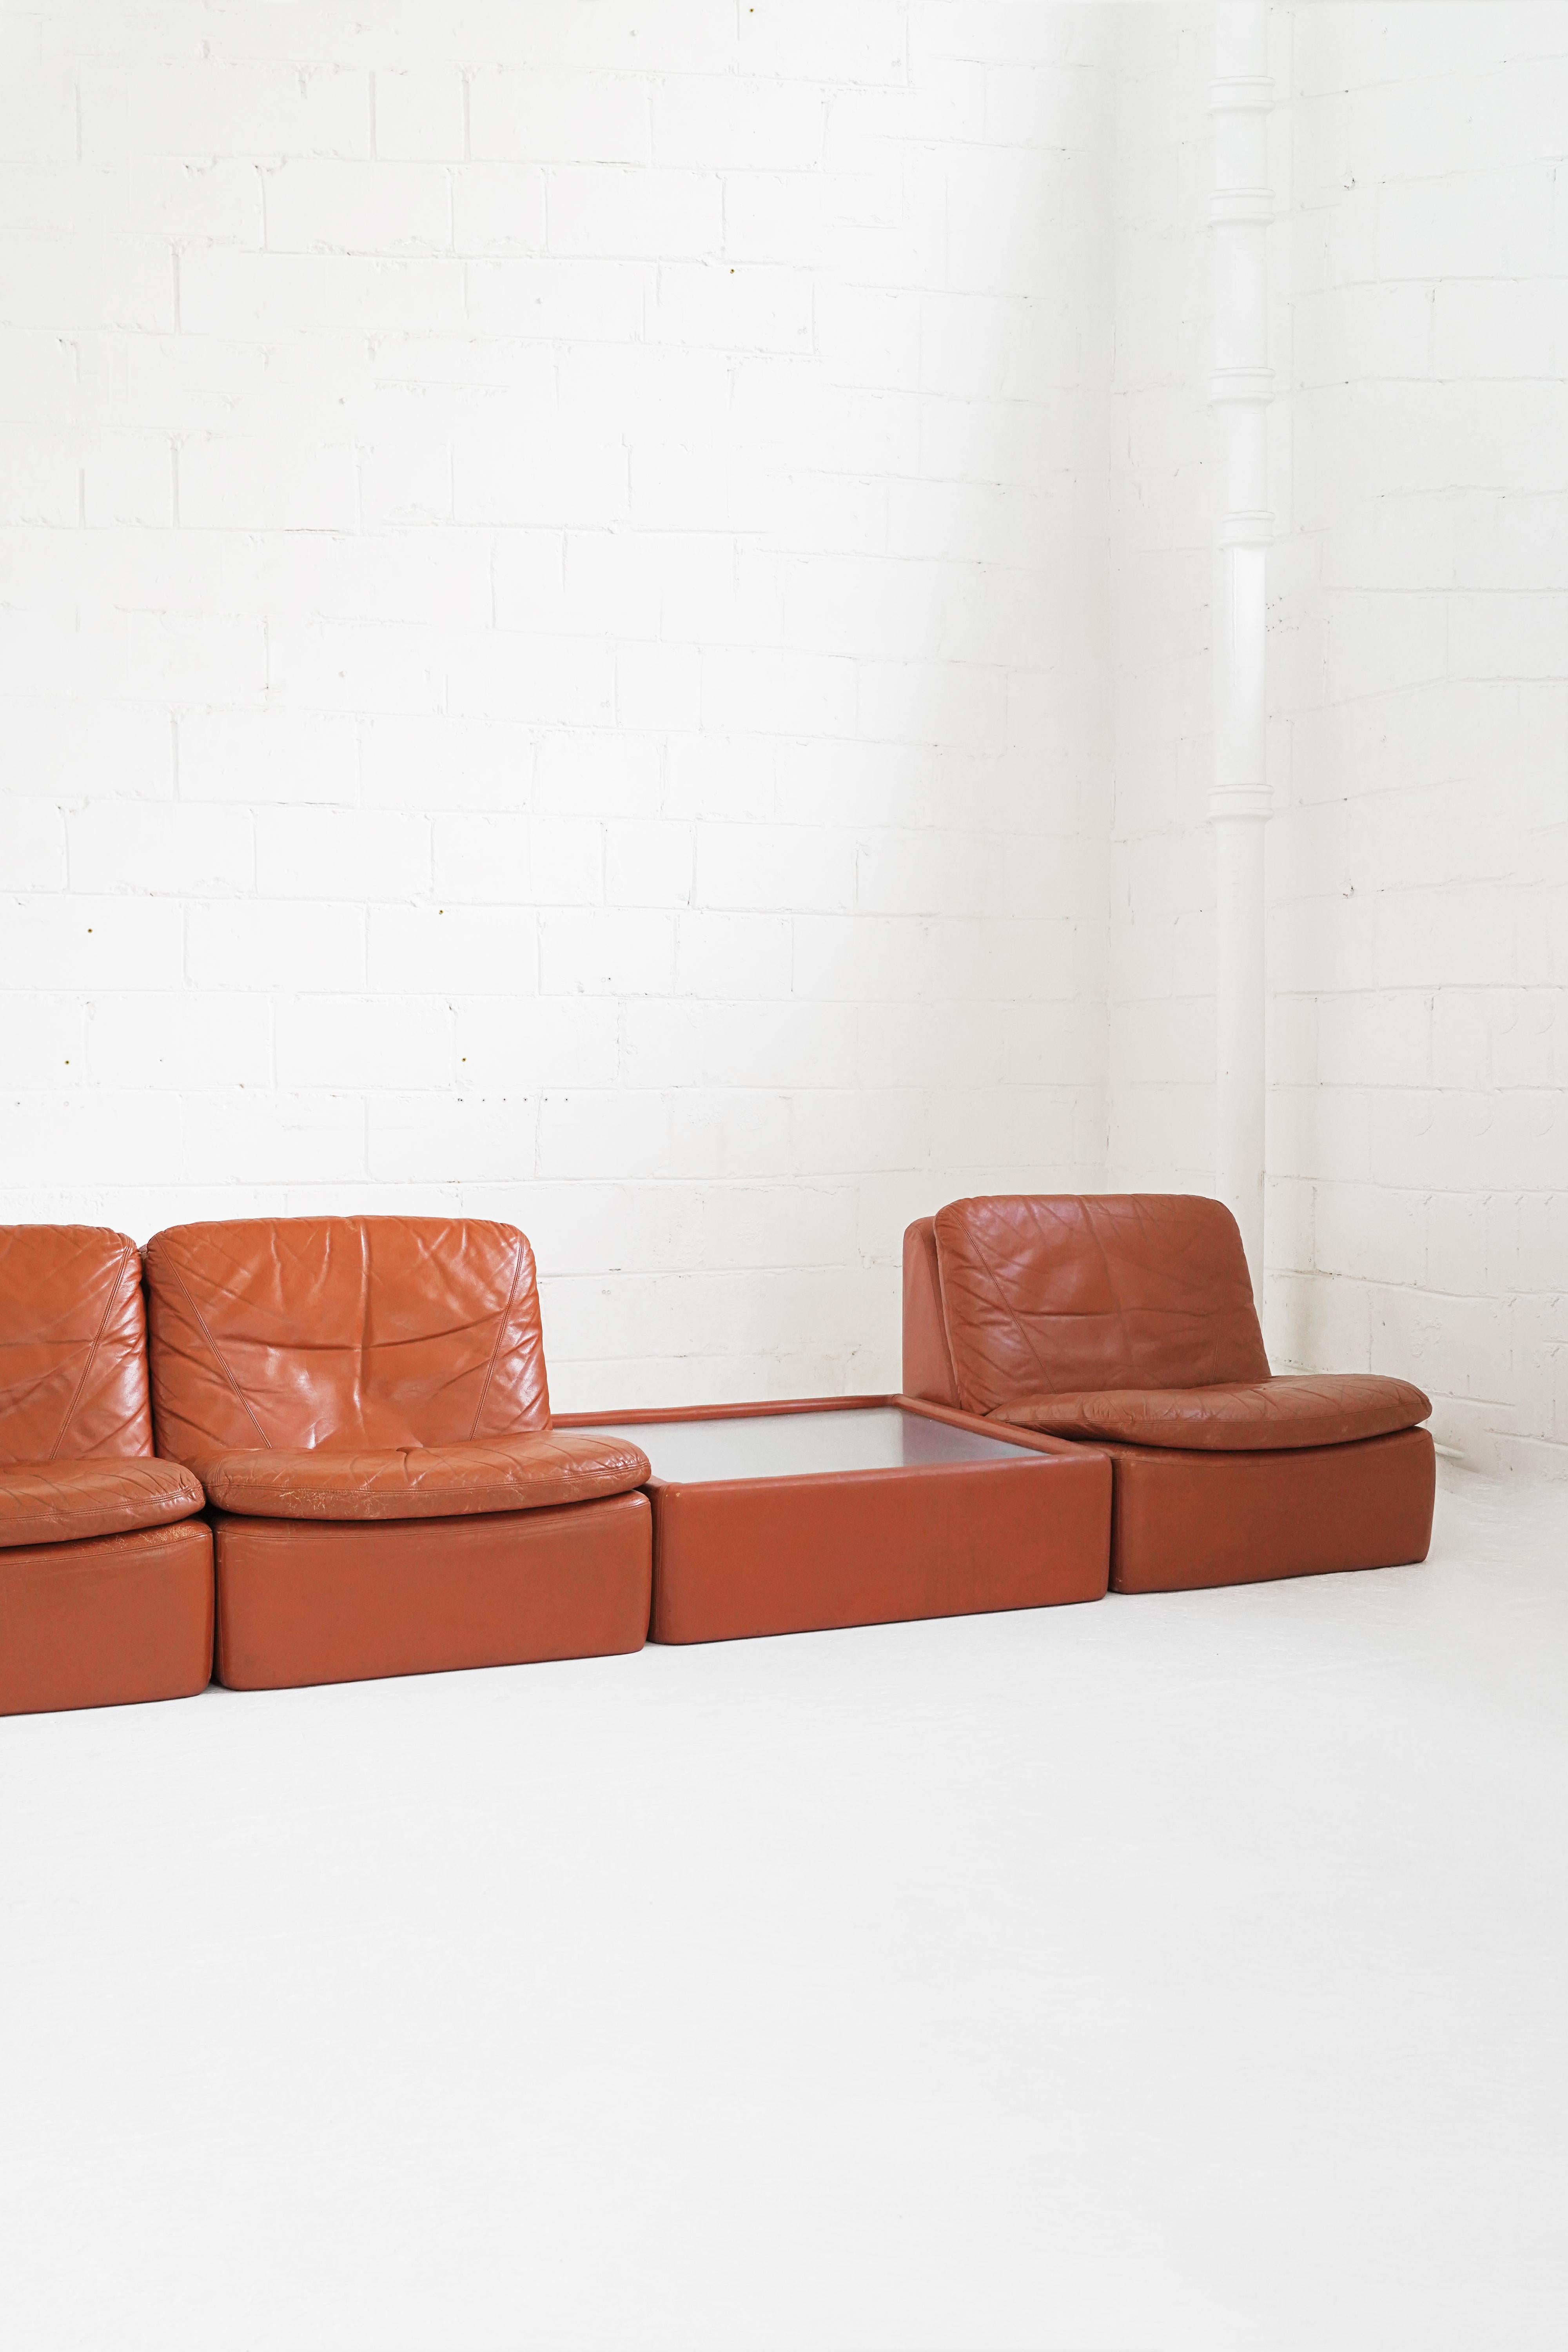 Stunning vintage leather modular set, including 3 seat pieces, 1 ottoman and 1 coffee table. Can configure in multiple designs with coffee table as part of the sectional. 

Seat Section: 25 1/2